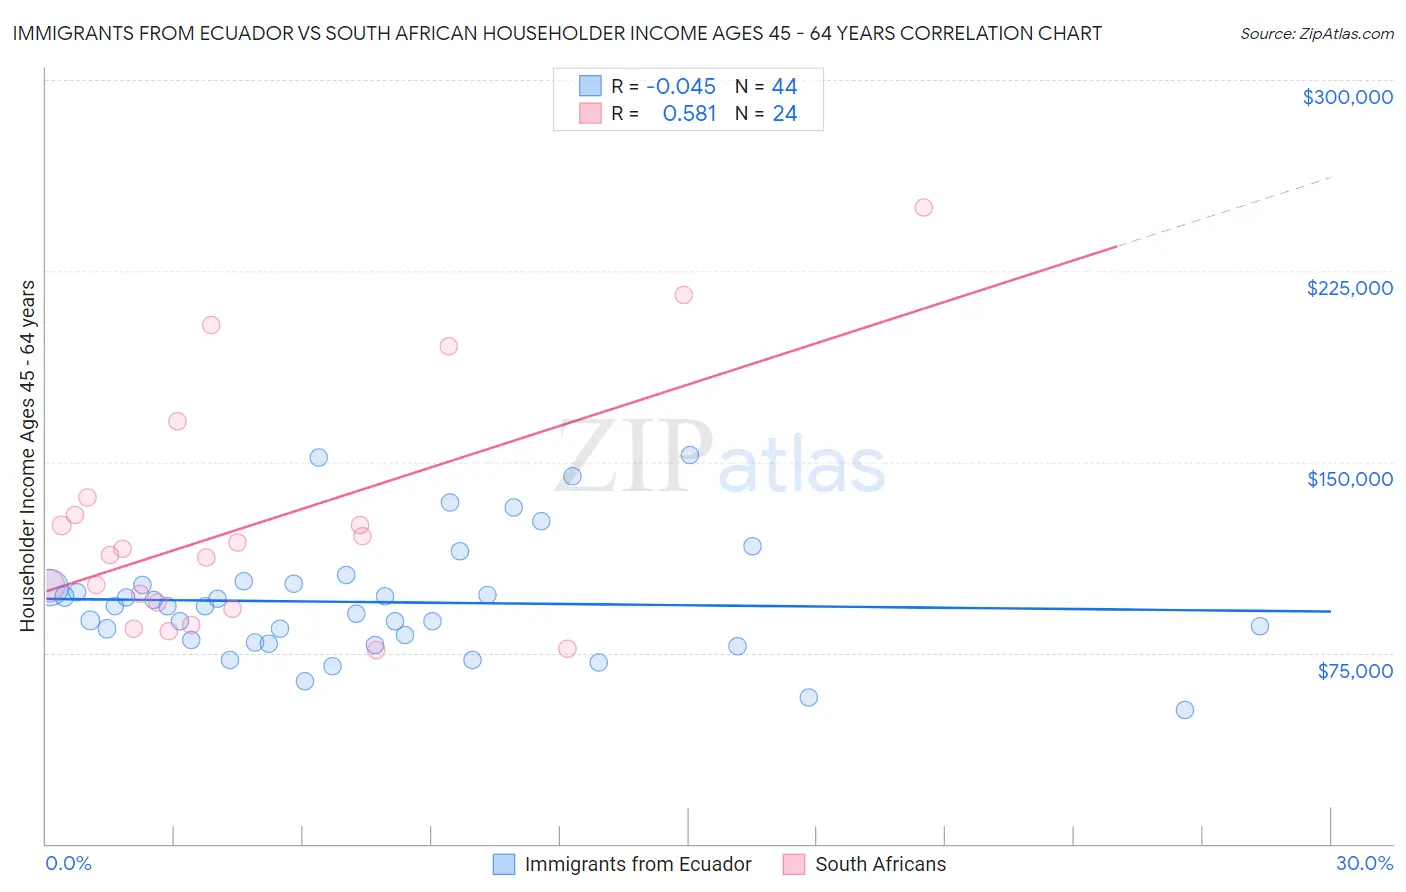 Immigrants from Ecuador vs South African Householder Income Ages 45 - 64 years